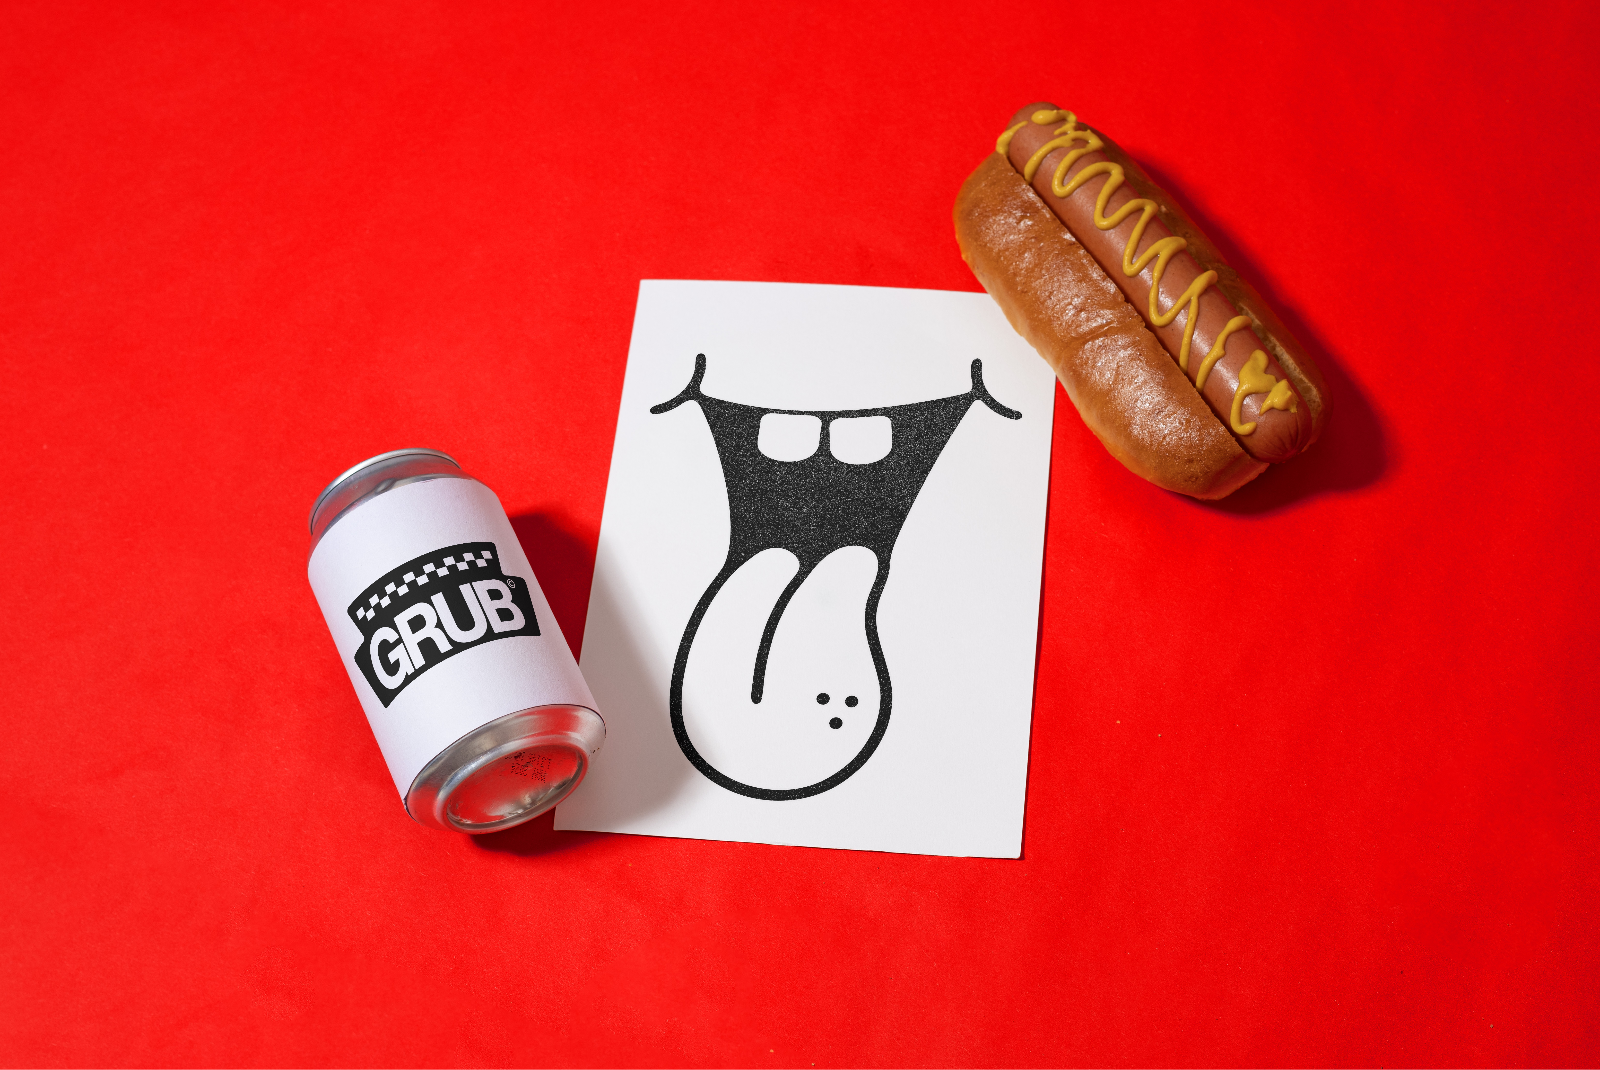 Creative food-themed mockup with illustrated tongue graphic on paper, soda can, hot dog on red background for design presentation.